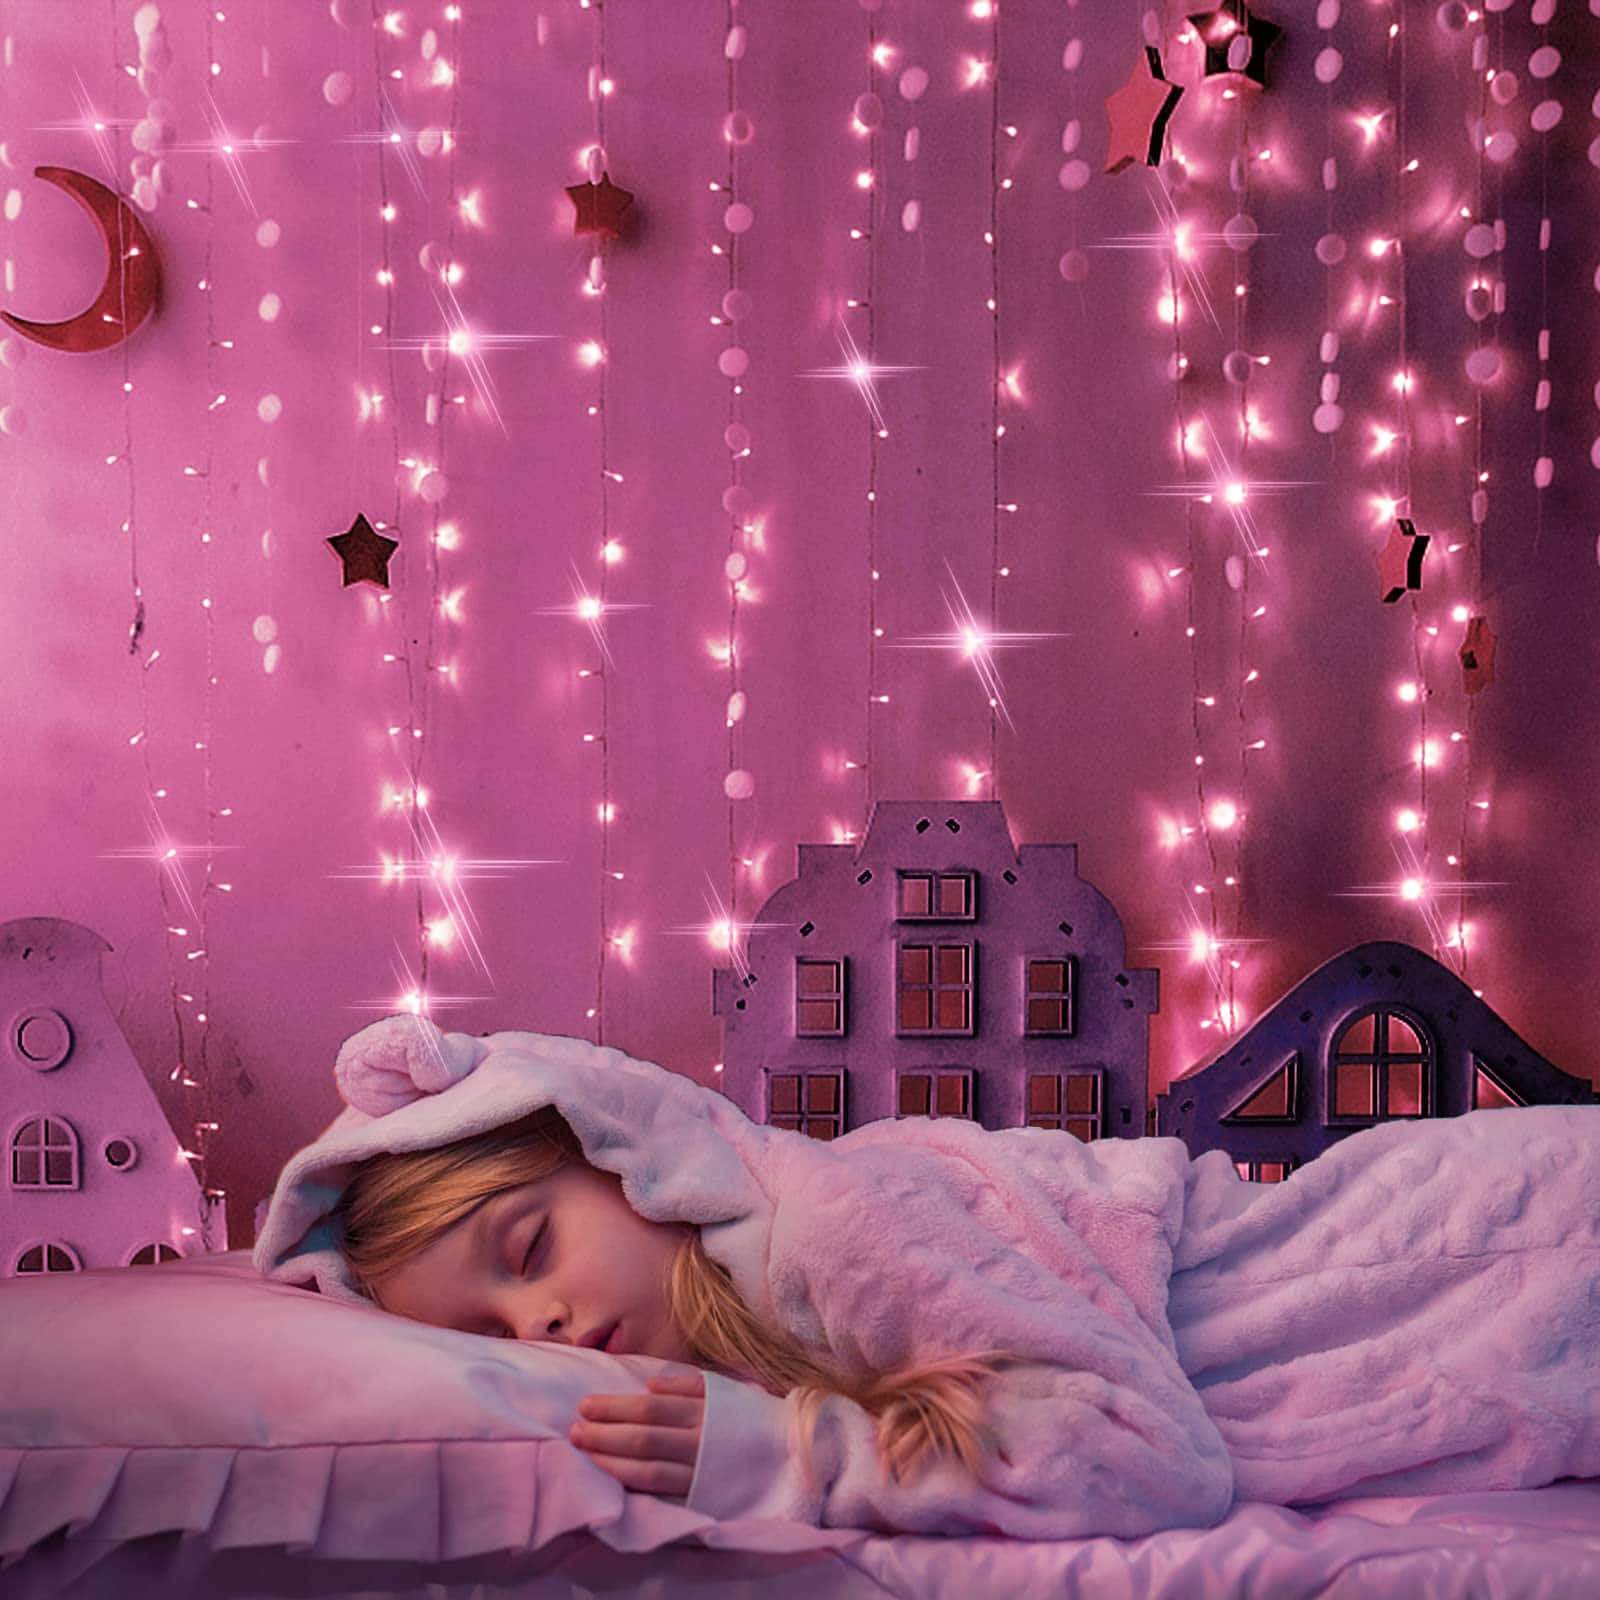 A Girl Sleeping In A Bed Wallpaper